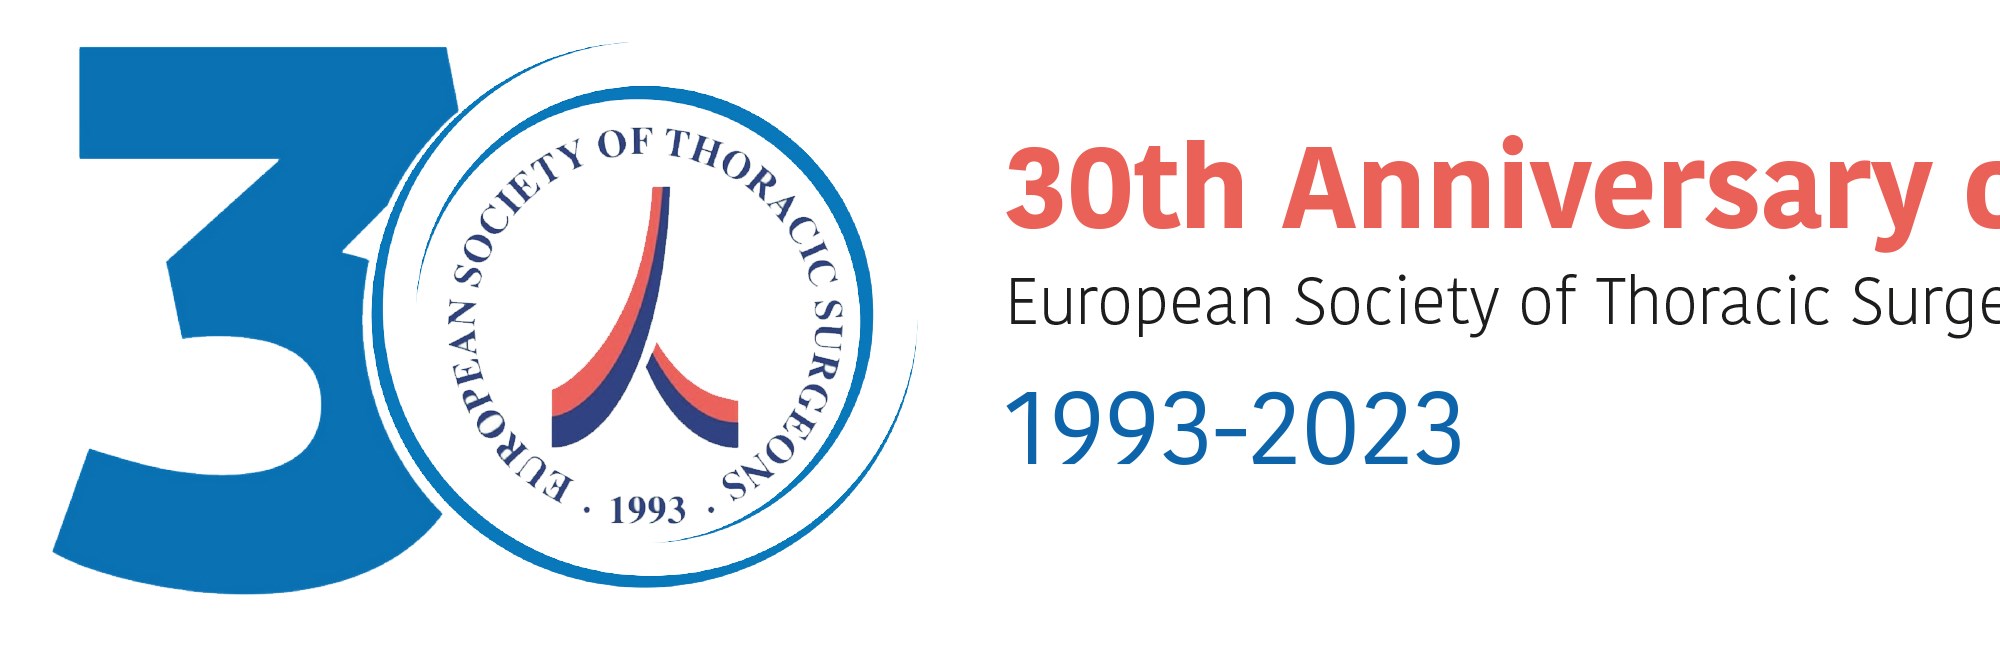 Welcoming the Founding Members at the 30th Anniversary of ESTS in Milano, Italy image